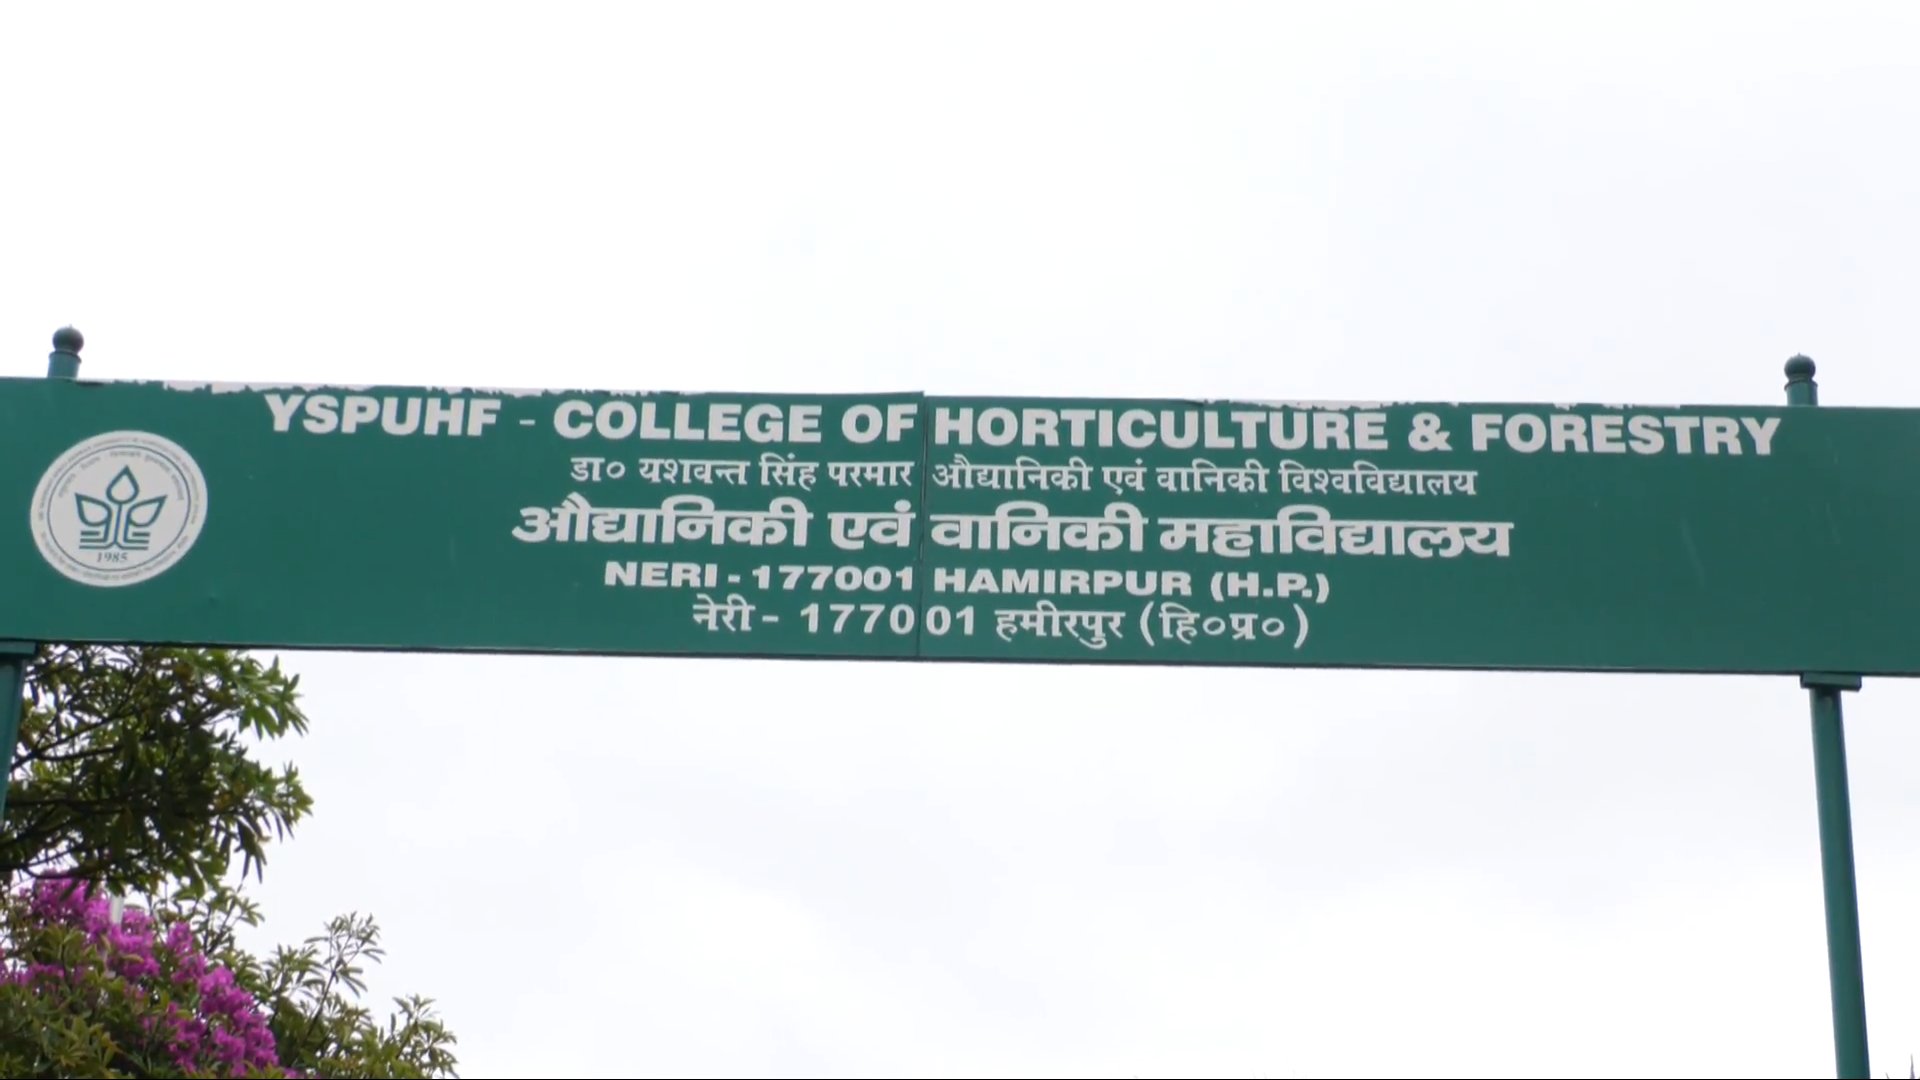 Horticulture And Forestry College Neri